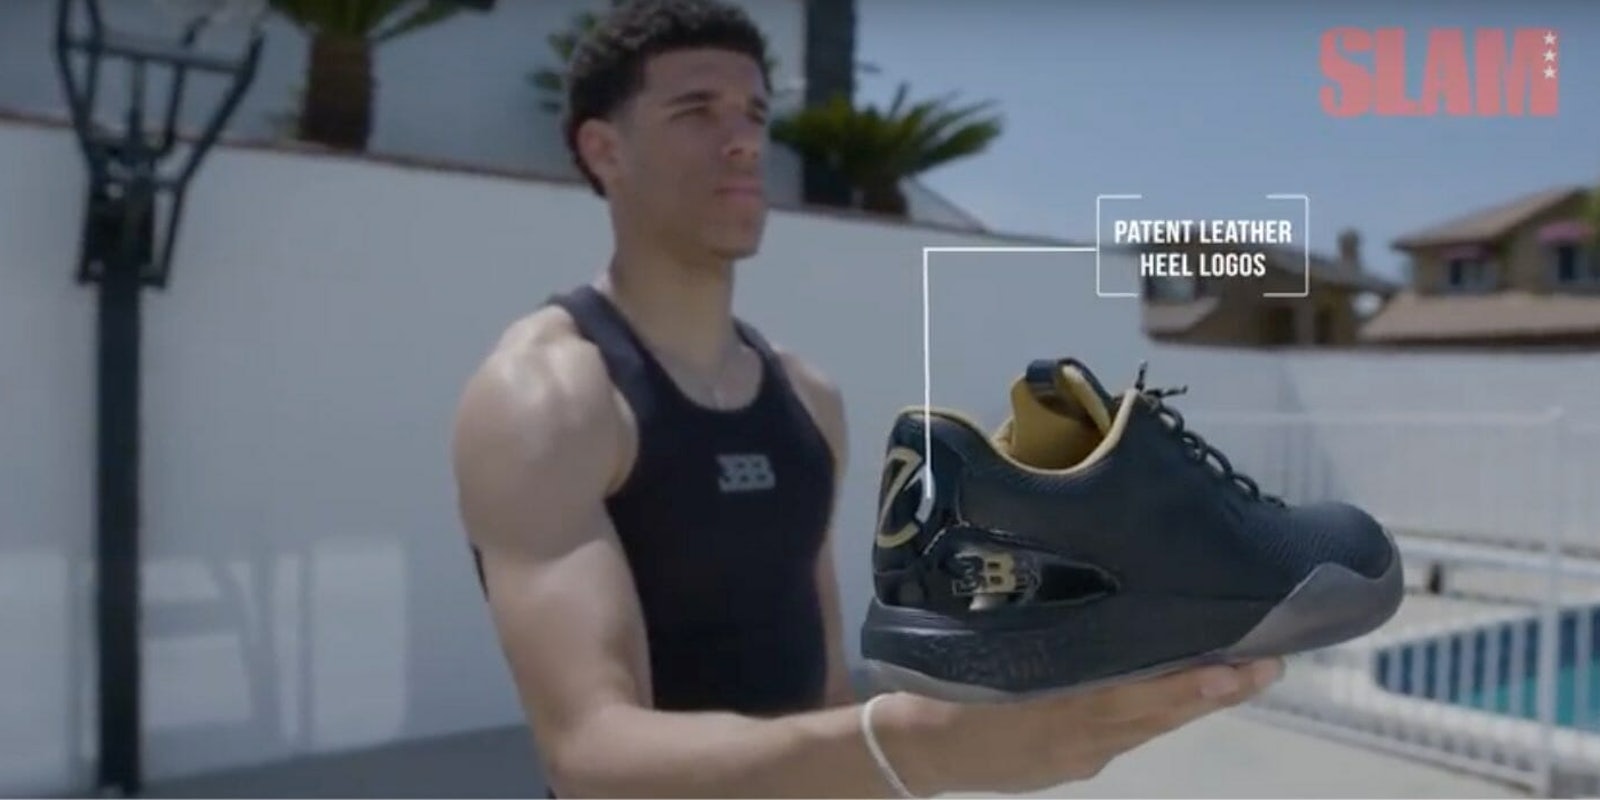 lonzo ball introduces shoes